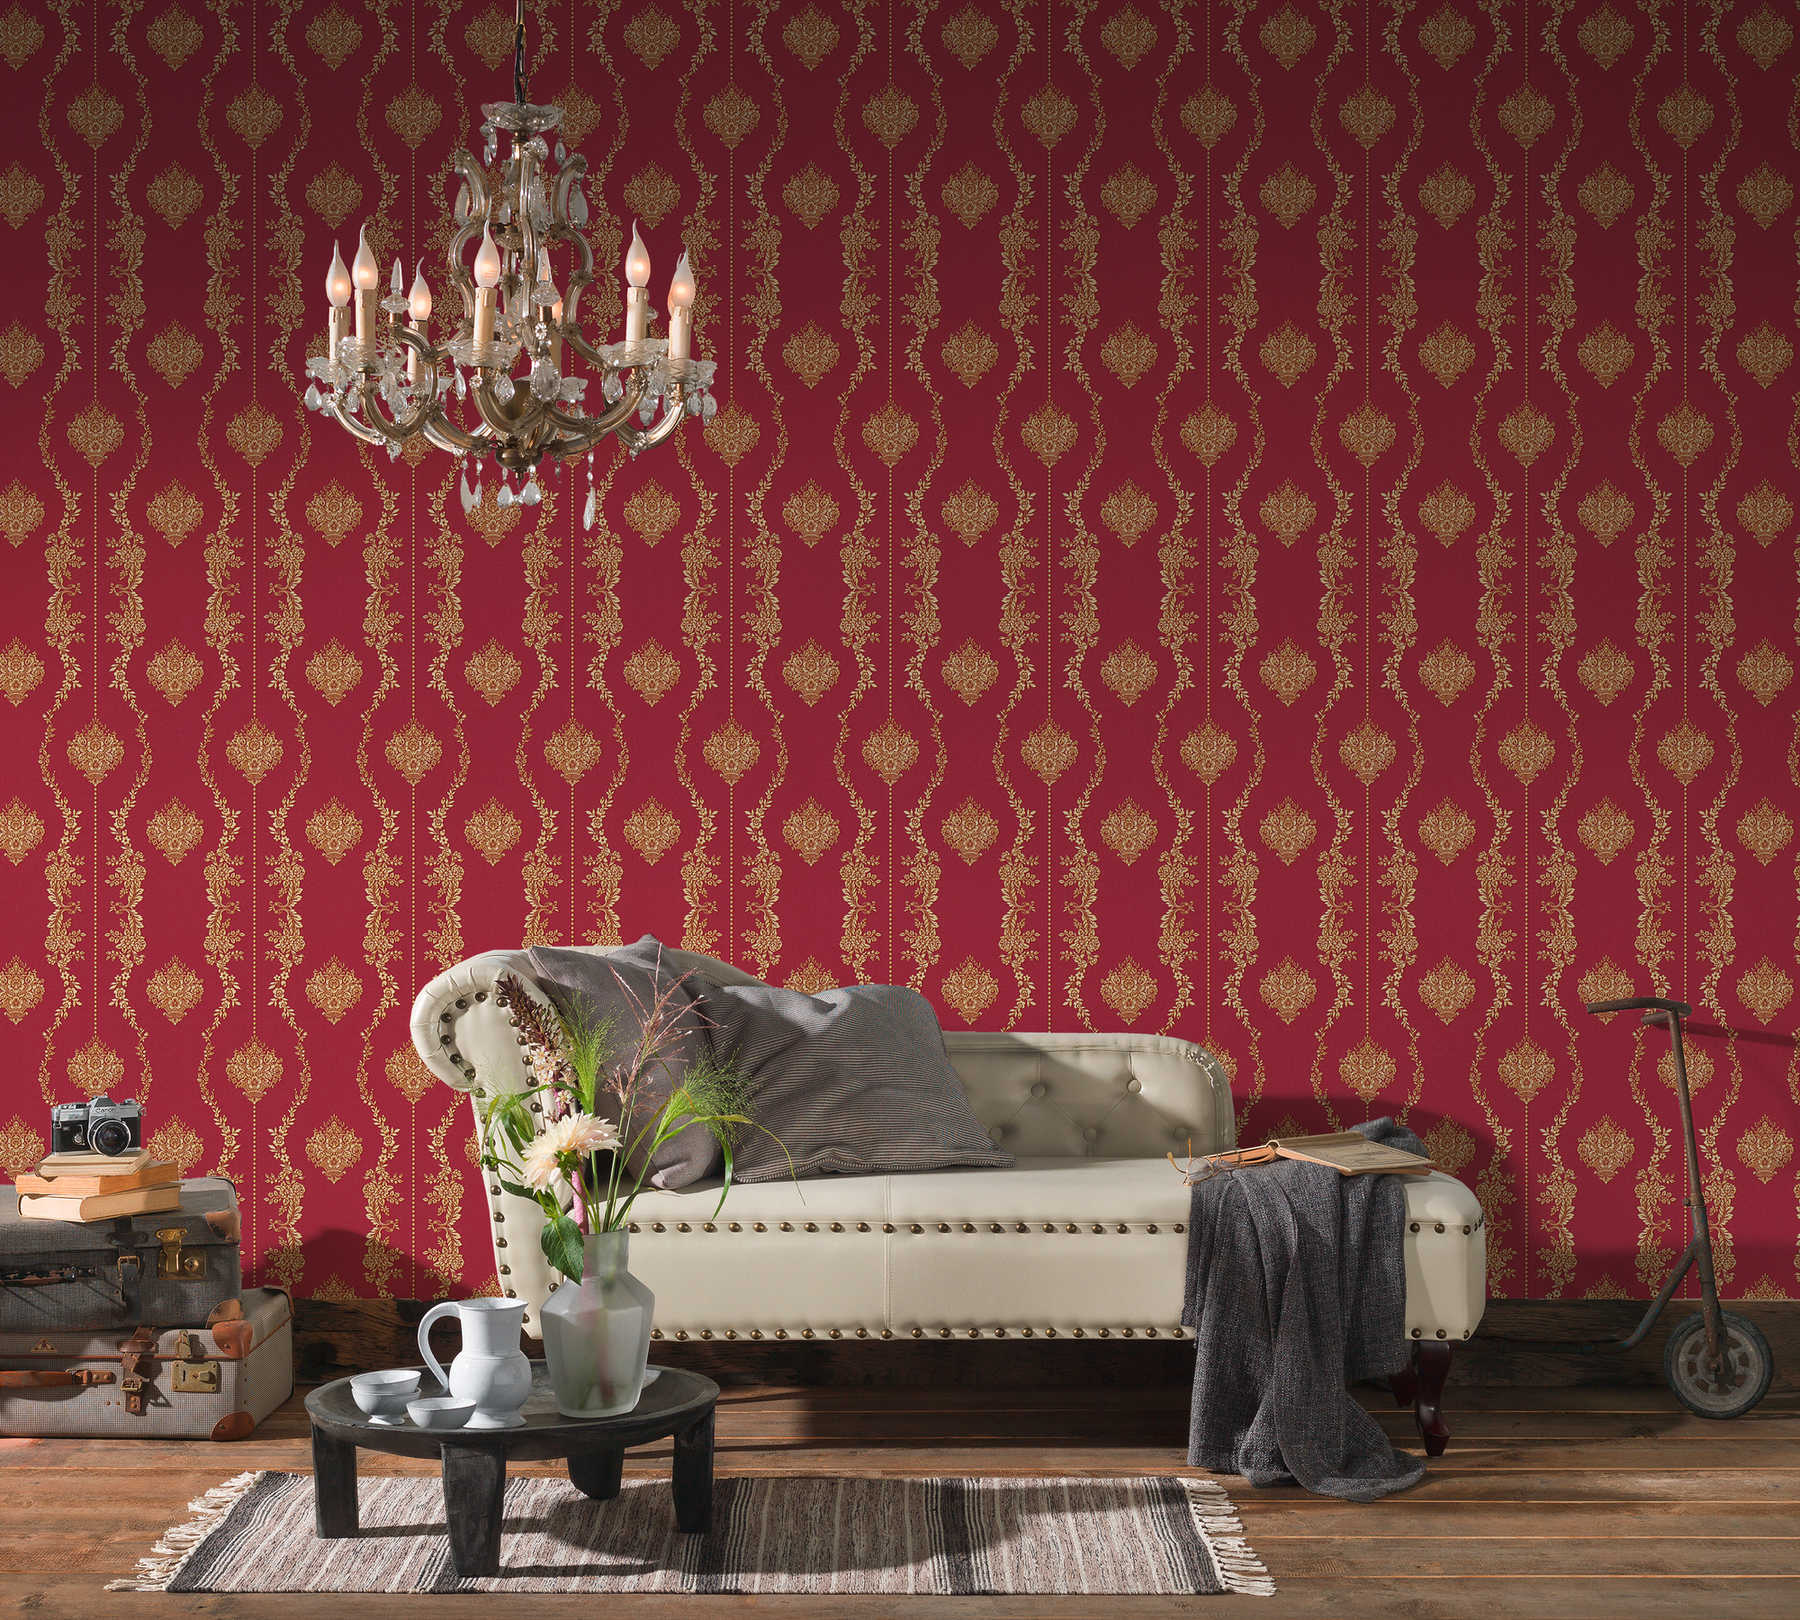             Classic ornament wallpaper with gold effect - metallic, red
        